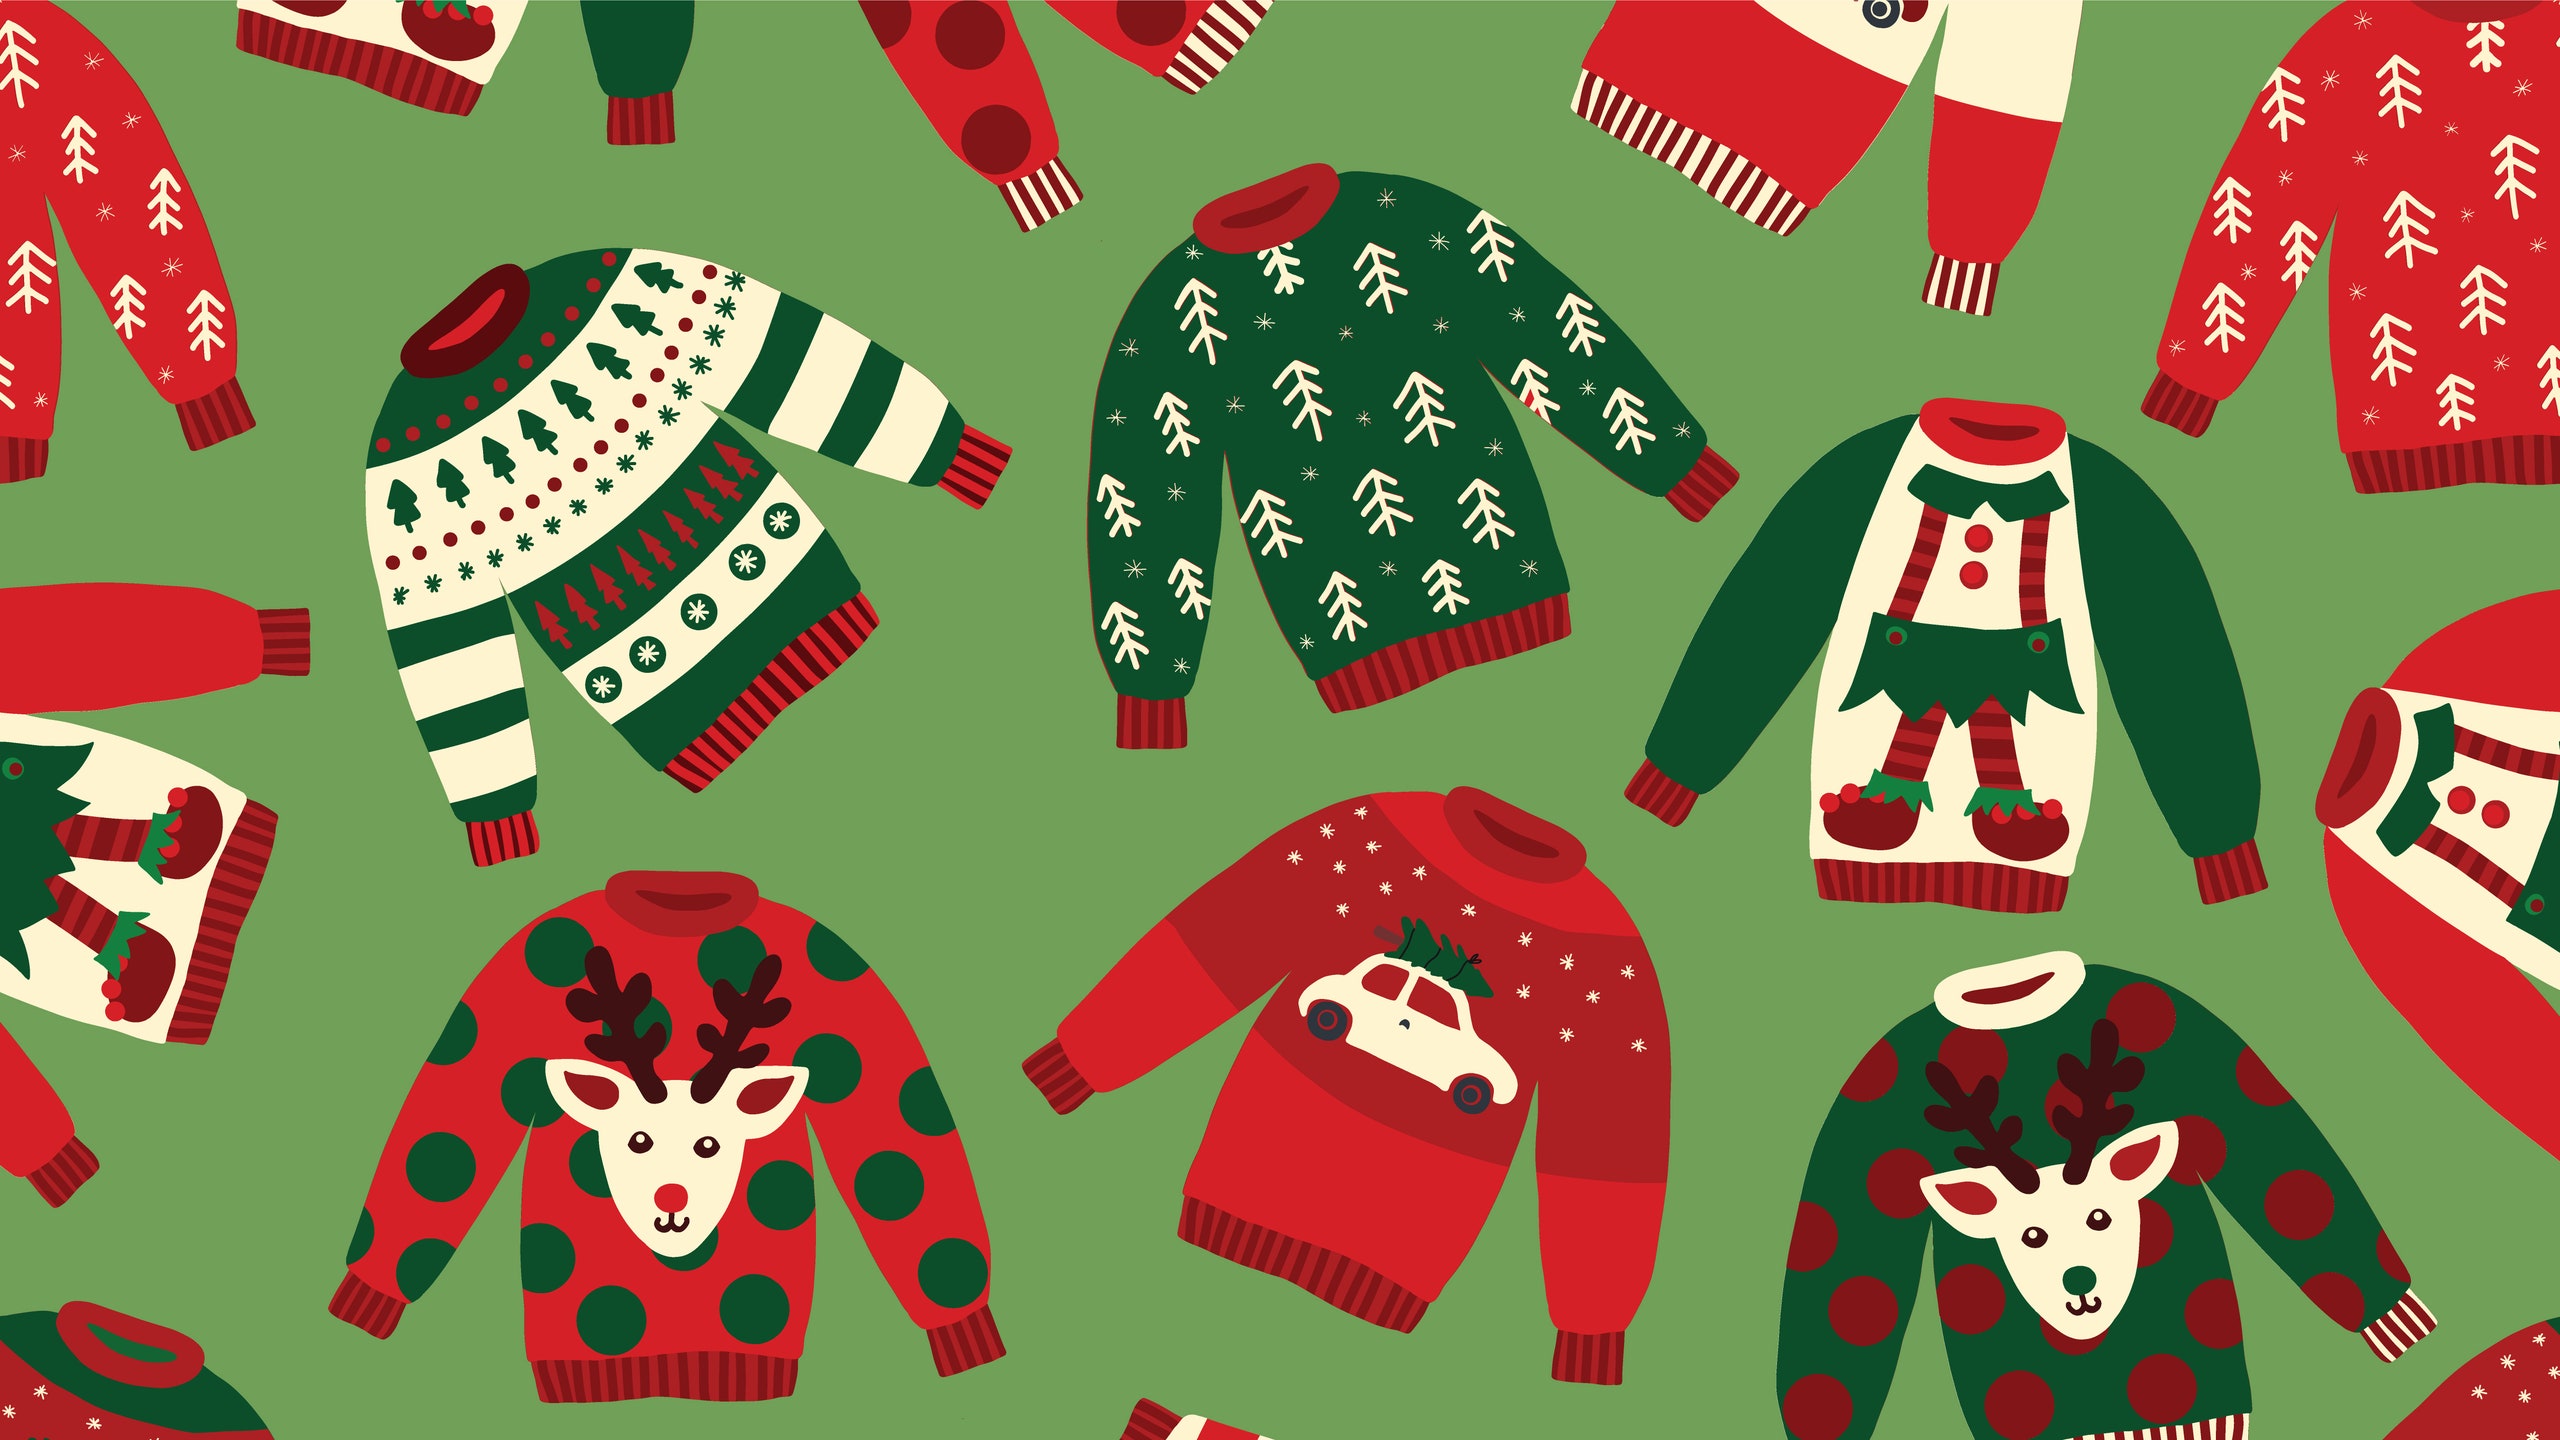 December 22 – Ugly Christmas Sweater Day